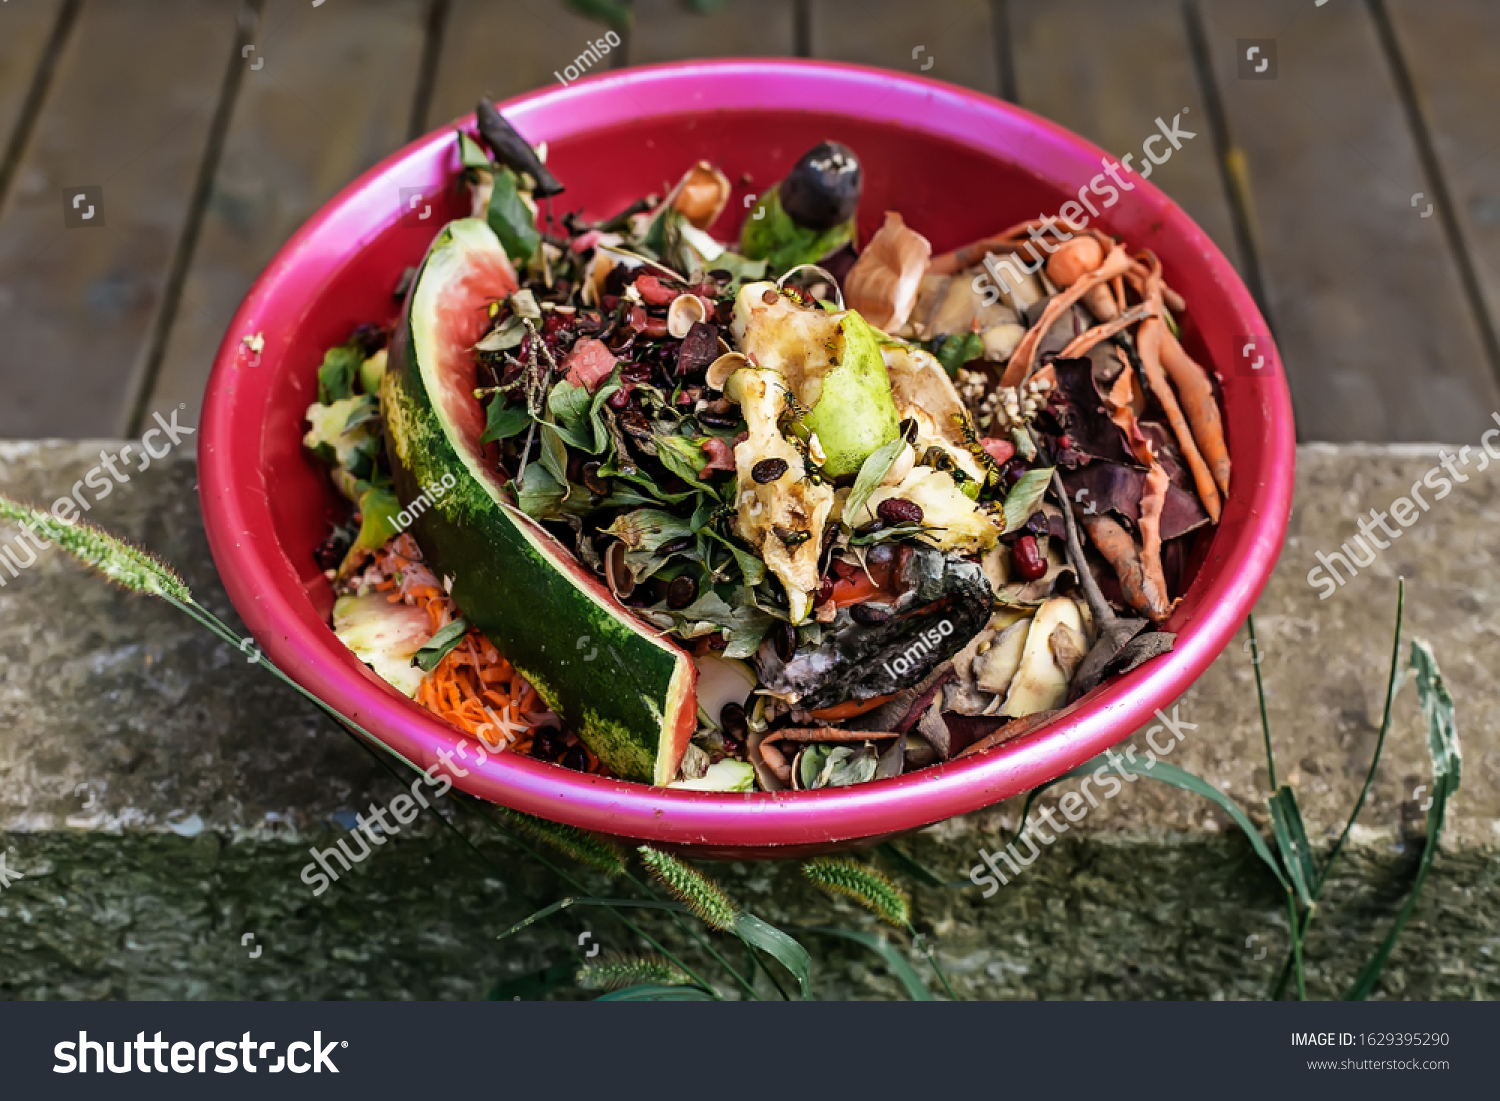 Stock Photo Kitchen Waste Collected In Composting Bin For Recycling And Organic Fertilizer Homemade Compost 1629395290 